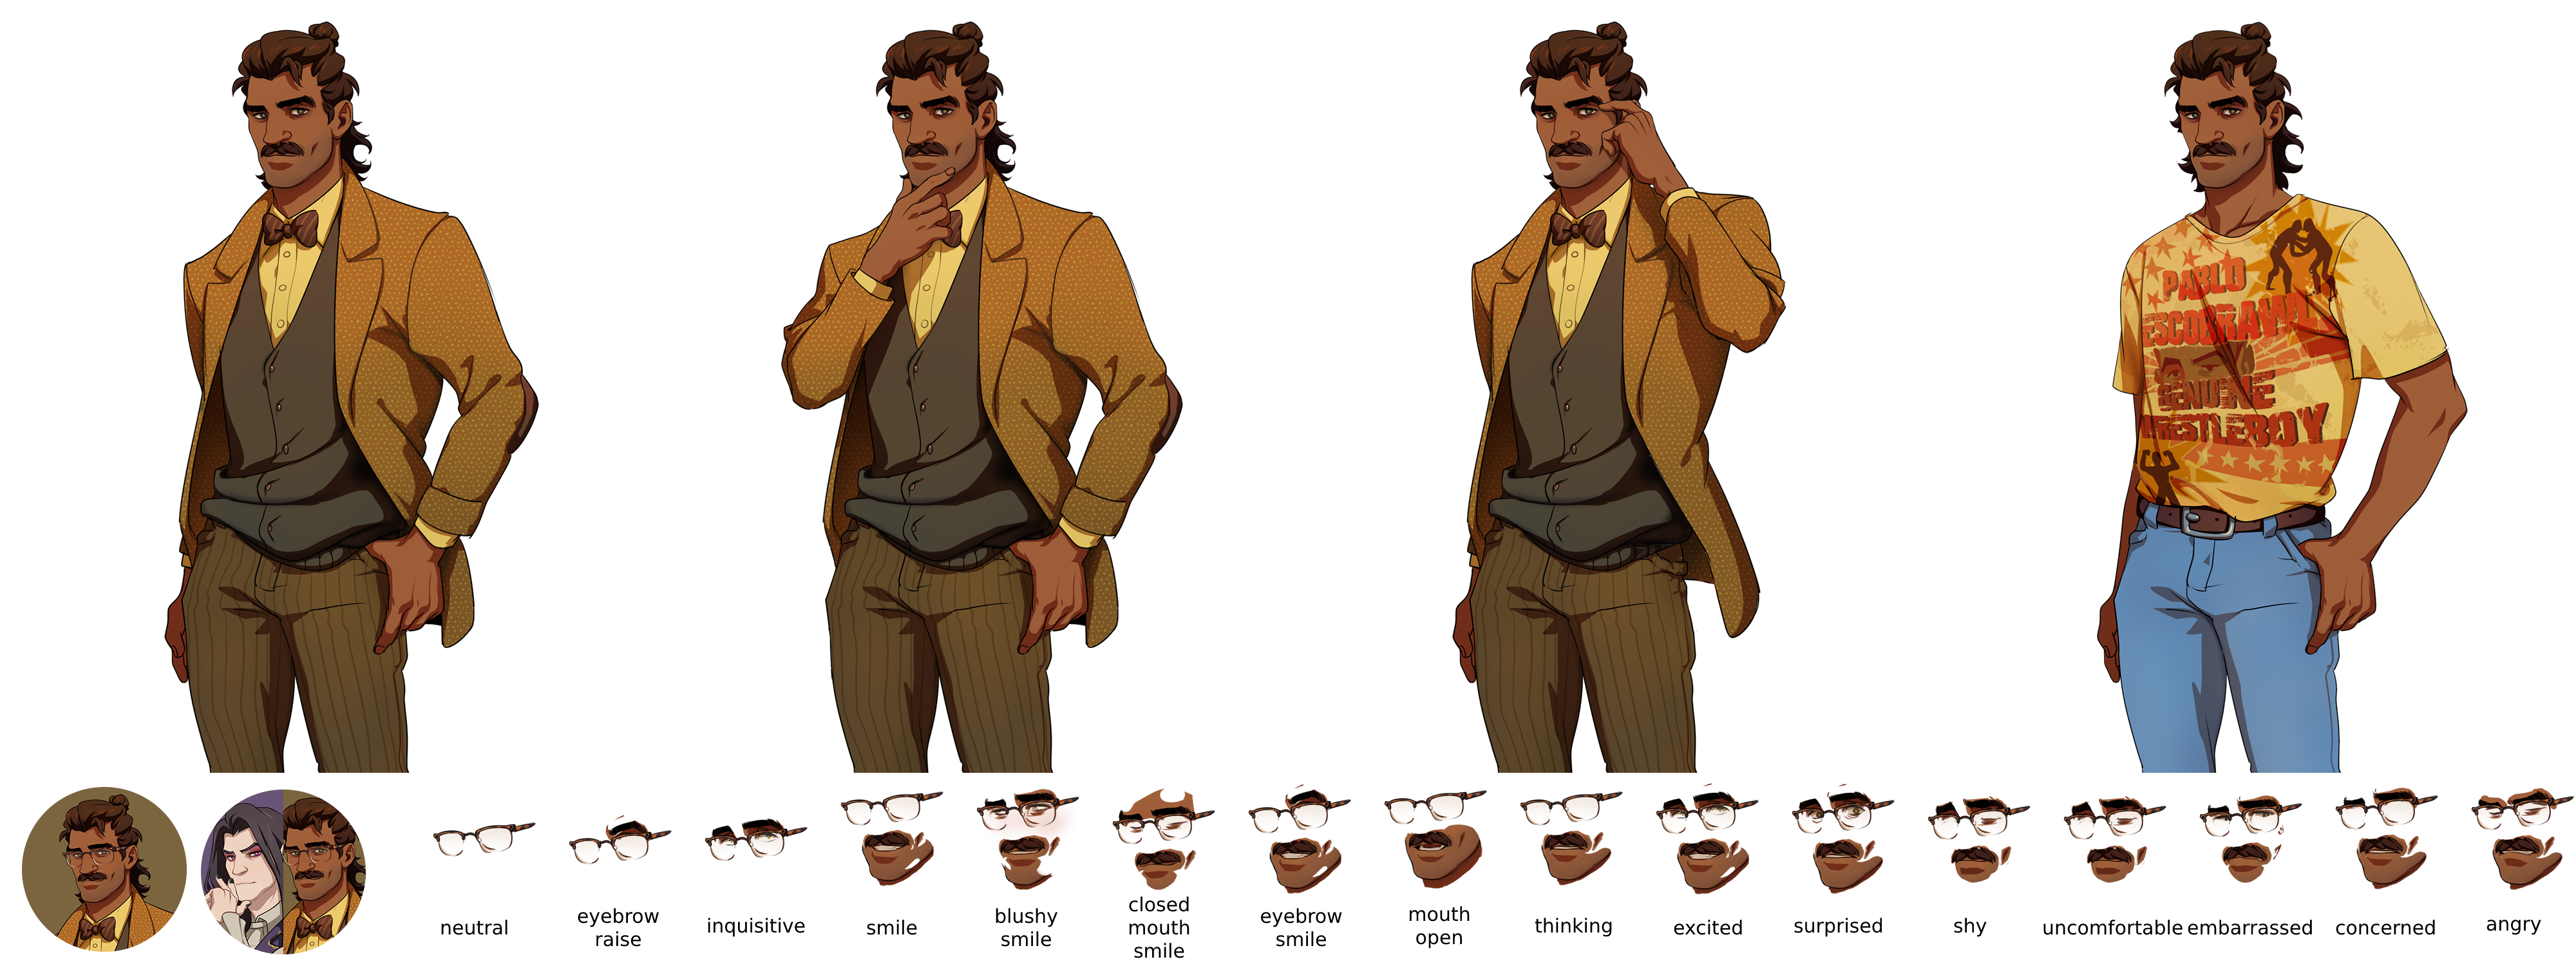 the-spriters-resource-full-sheet-view-dream-daddy-a-daddy-dating-simulator-hugo-vega